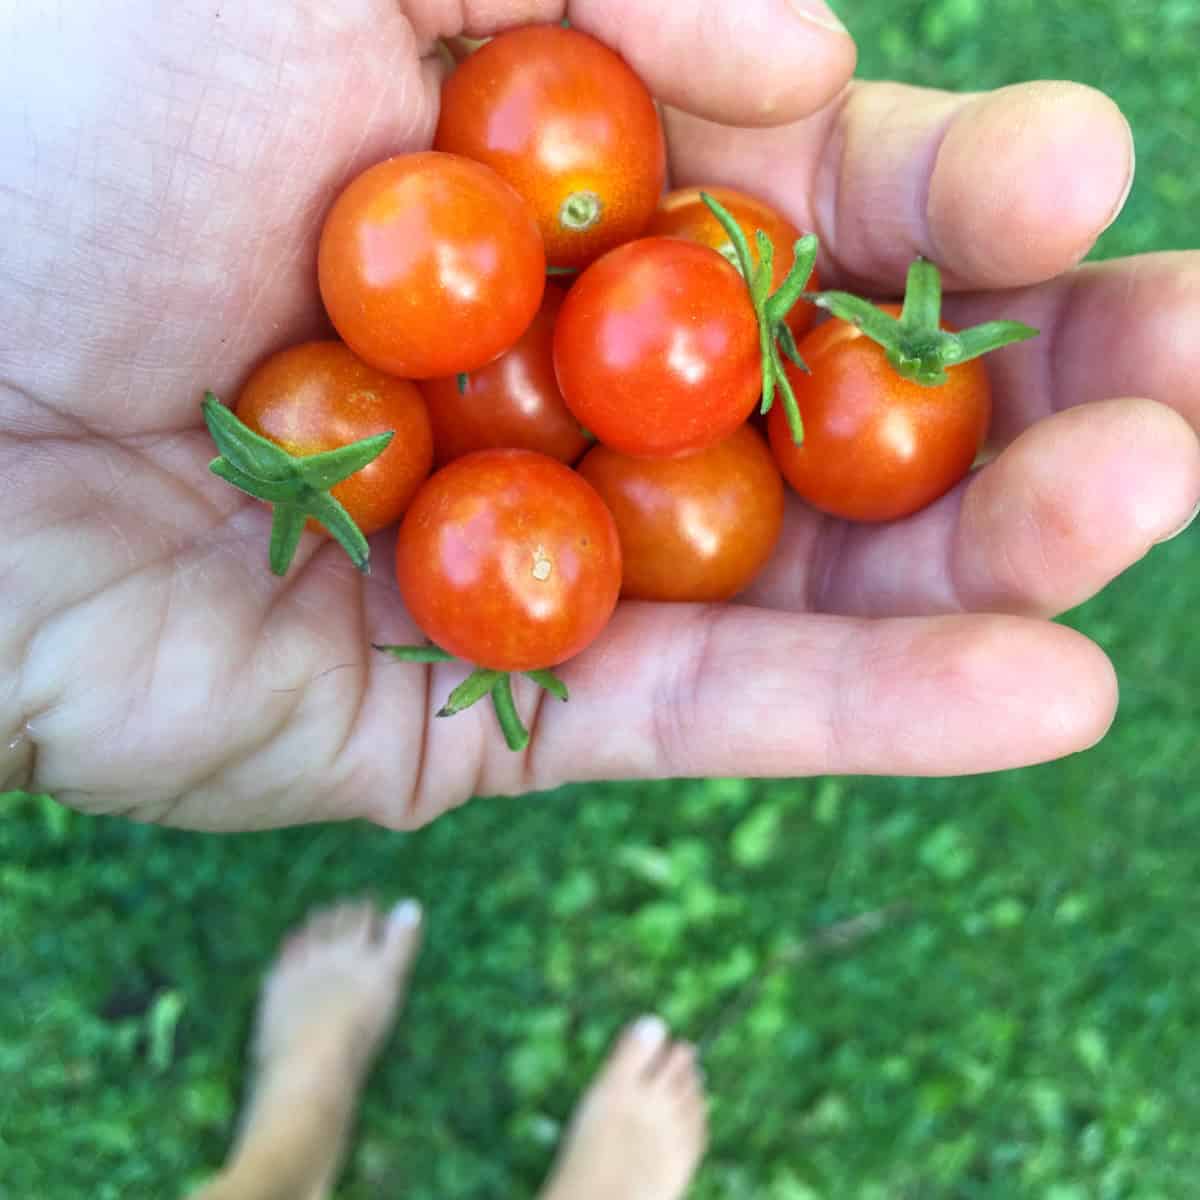 An image of a woman's hand holding cherry tomatoes.